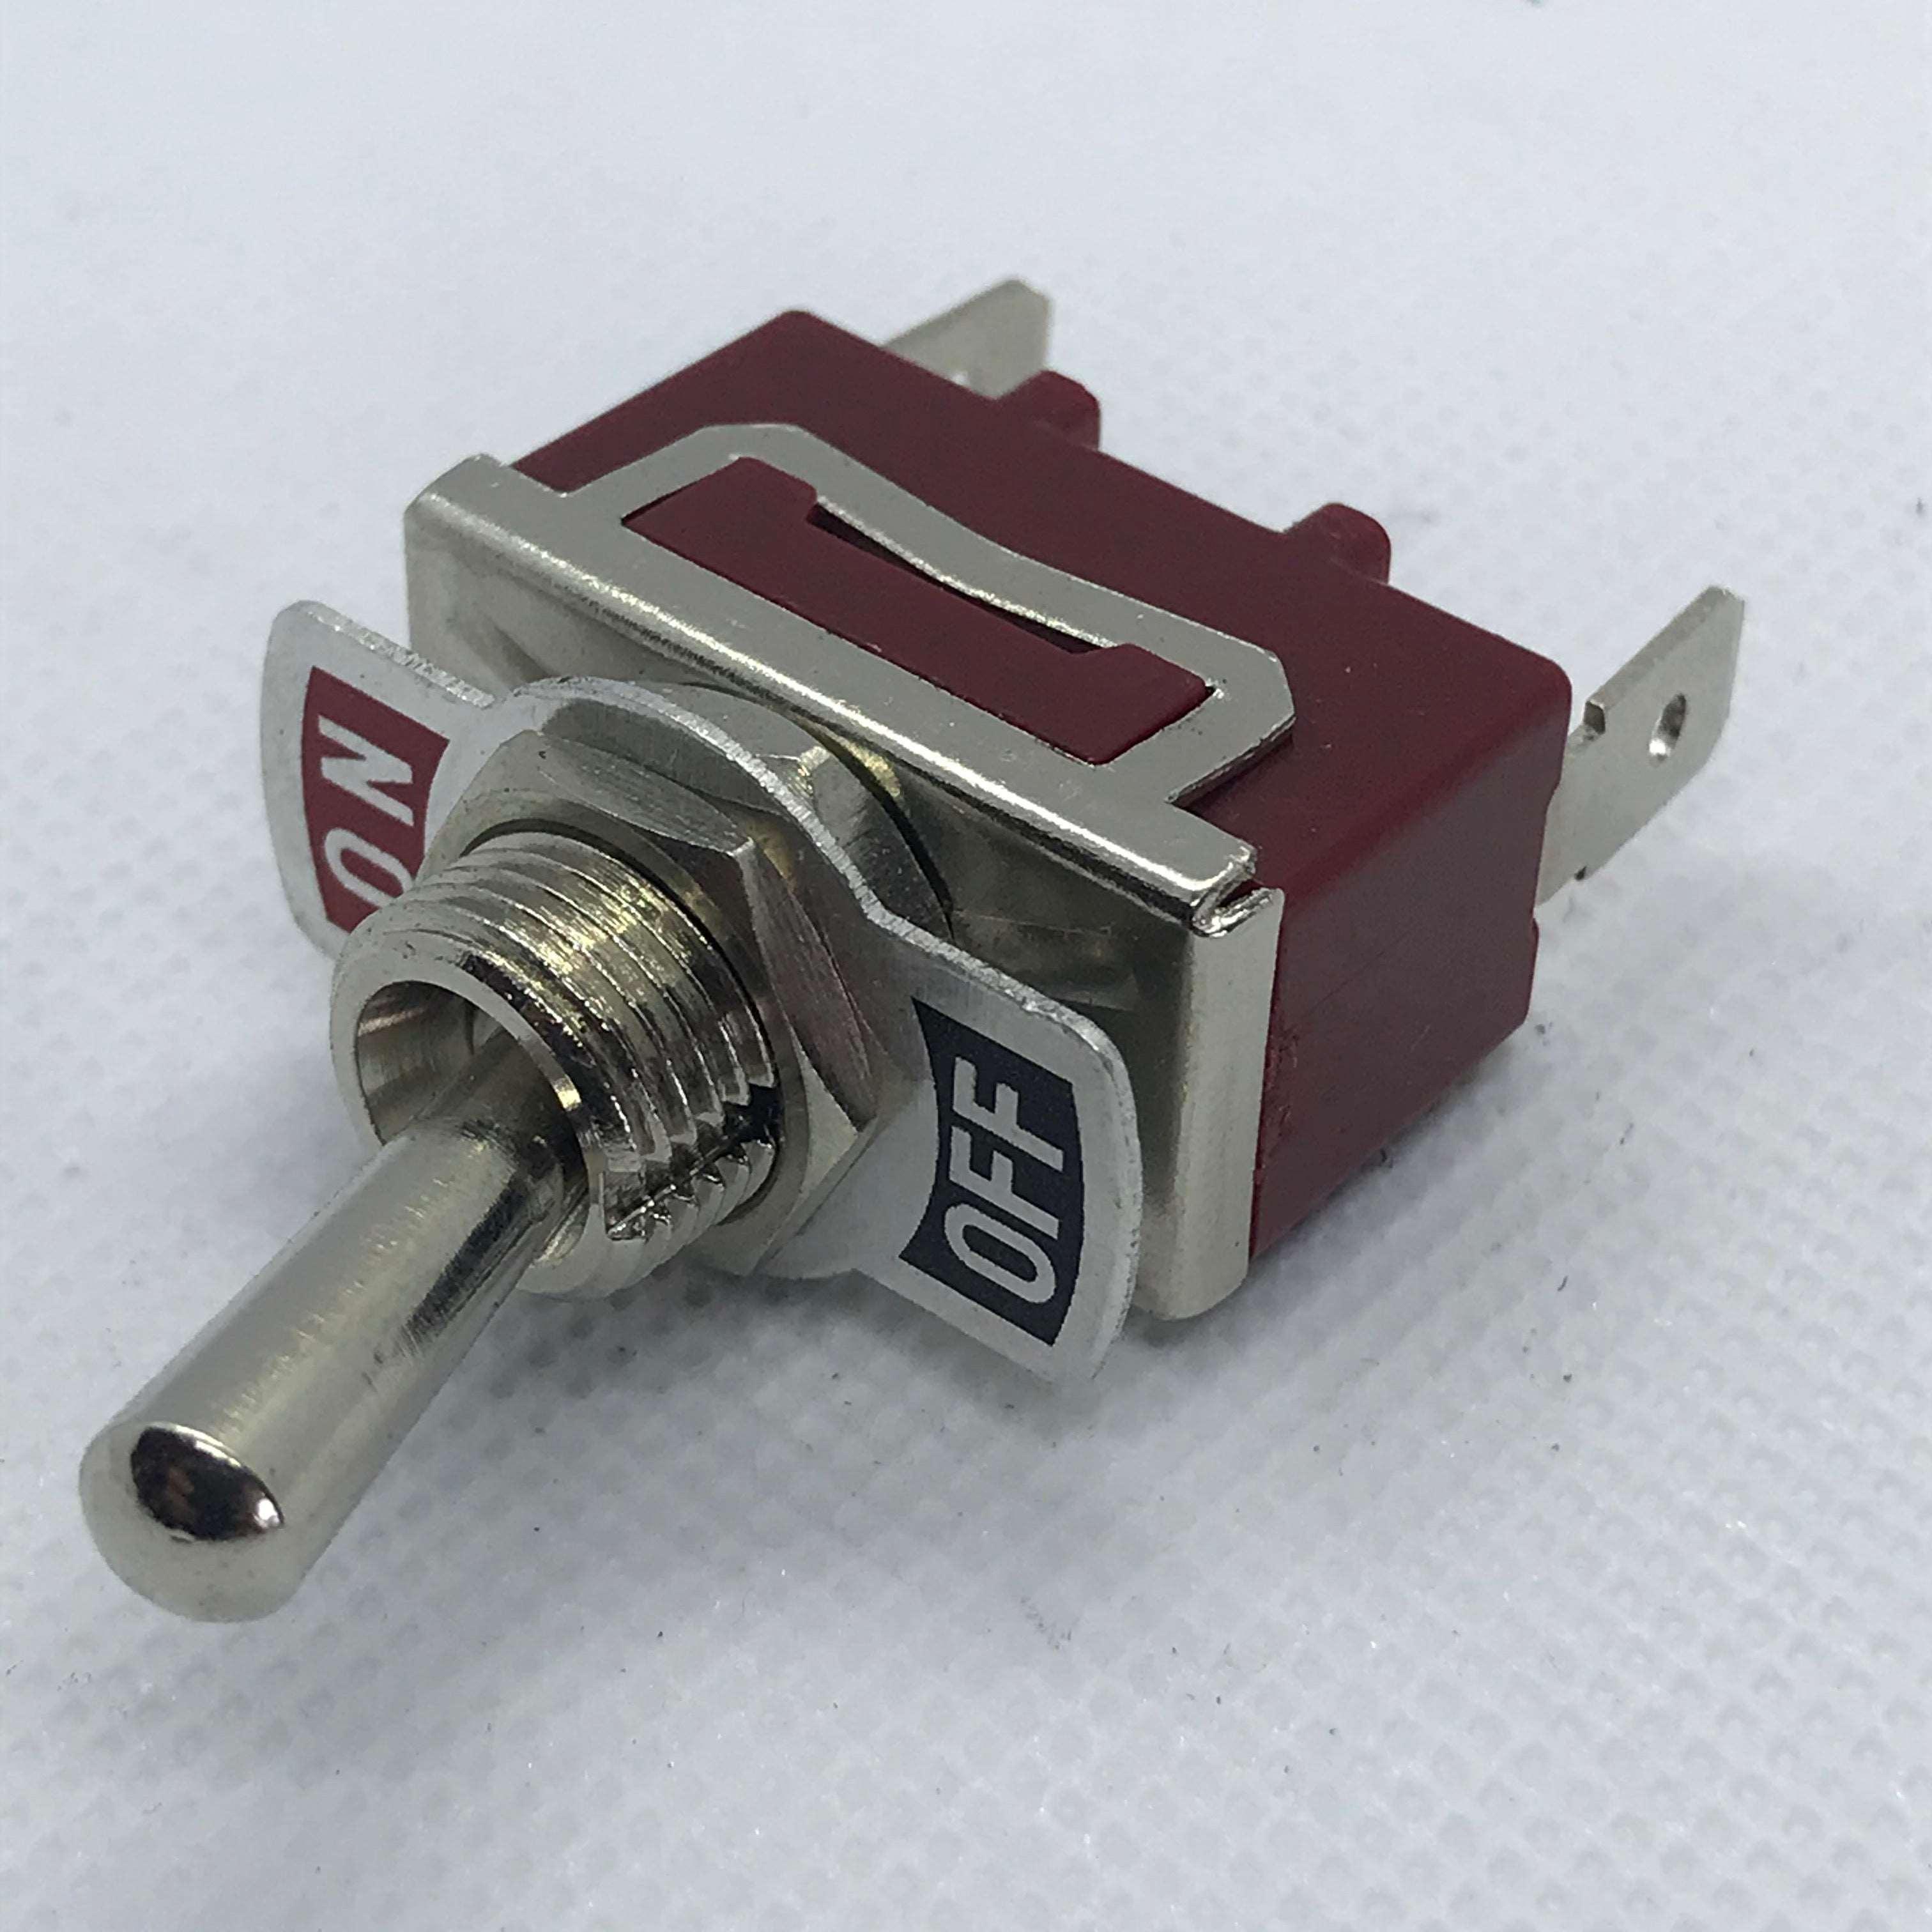 RCRO015  ON/OFF Switch for ES4EA, LD Blenders, Chicken Rotisserie